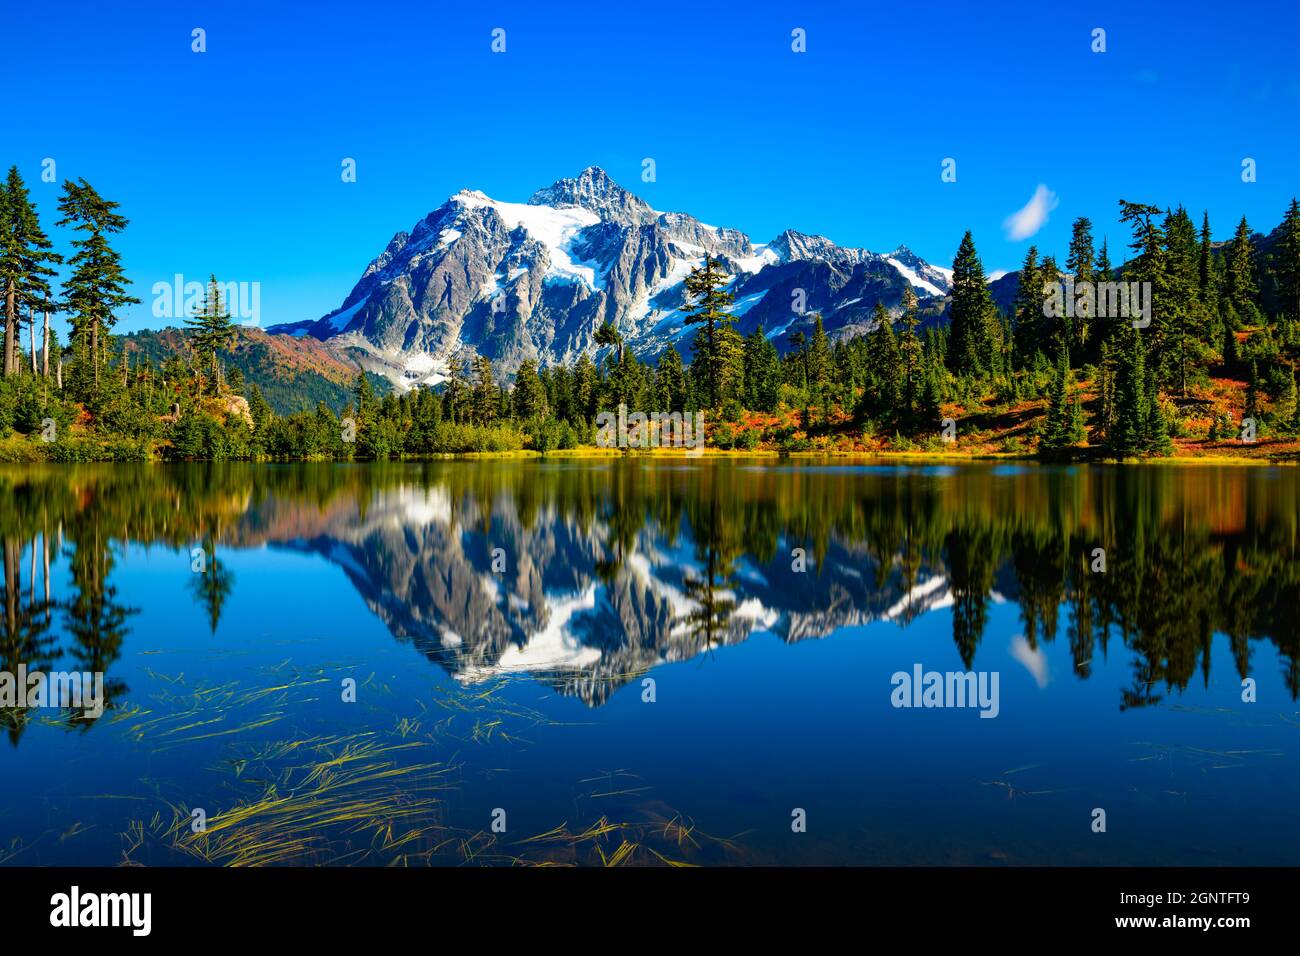 The iconic view of Mount Shuksan reflecting in Picture Lake during the Fall in the Pacific Northwest of the United States Stock Photo